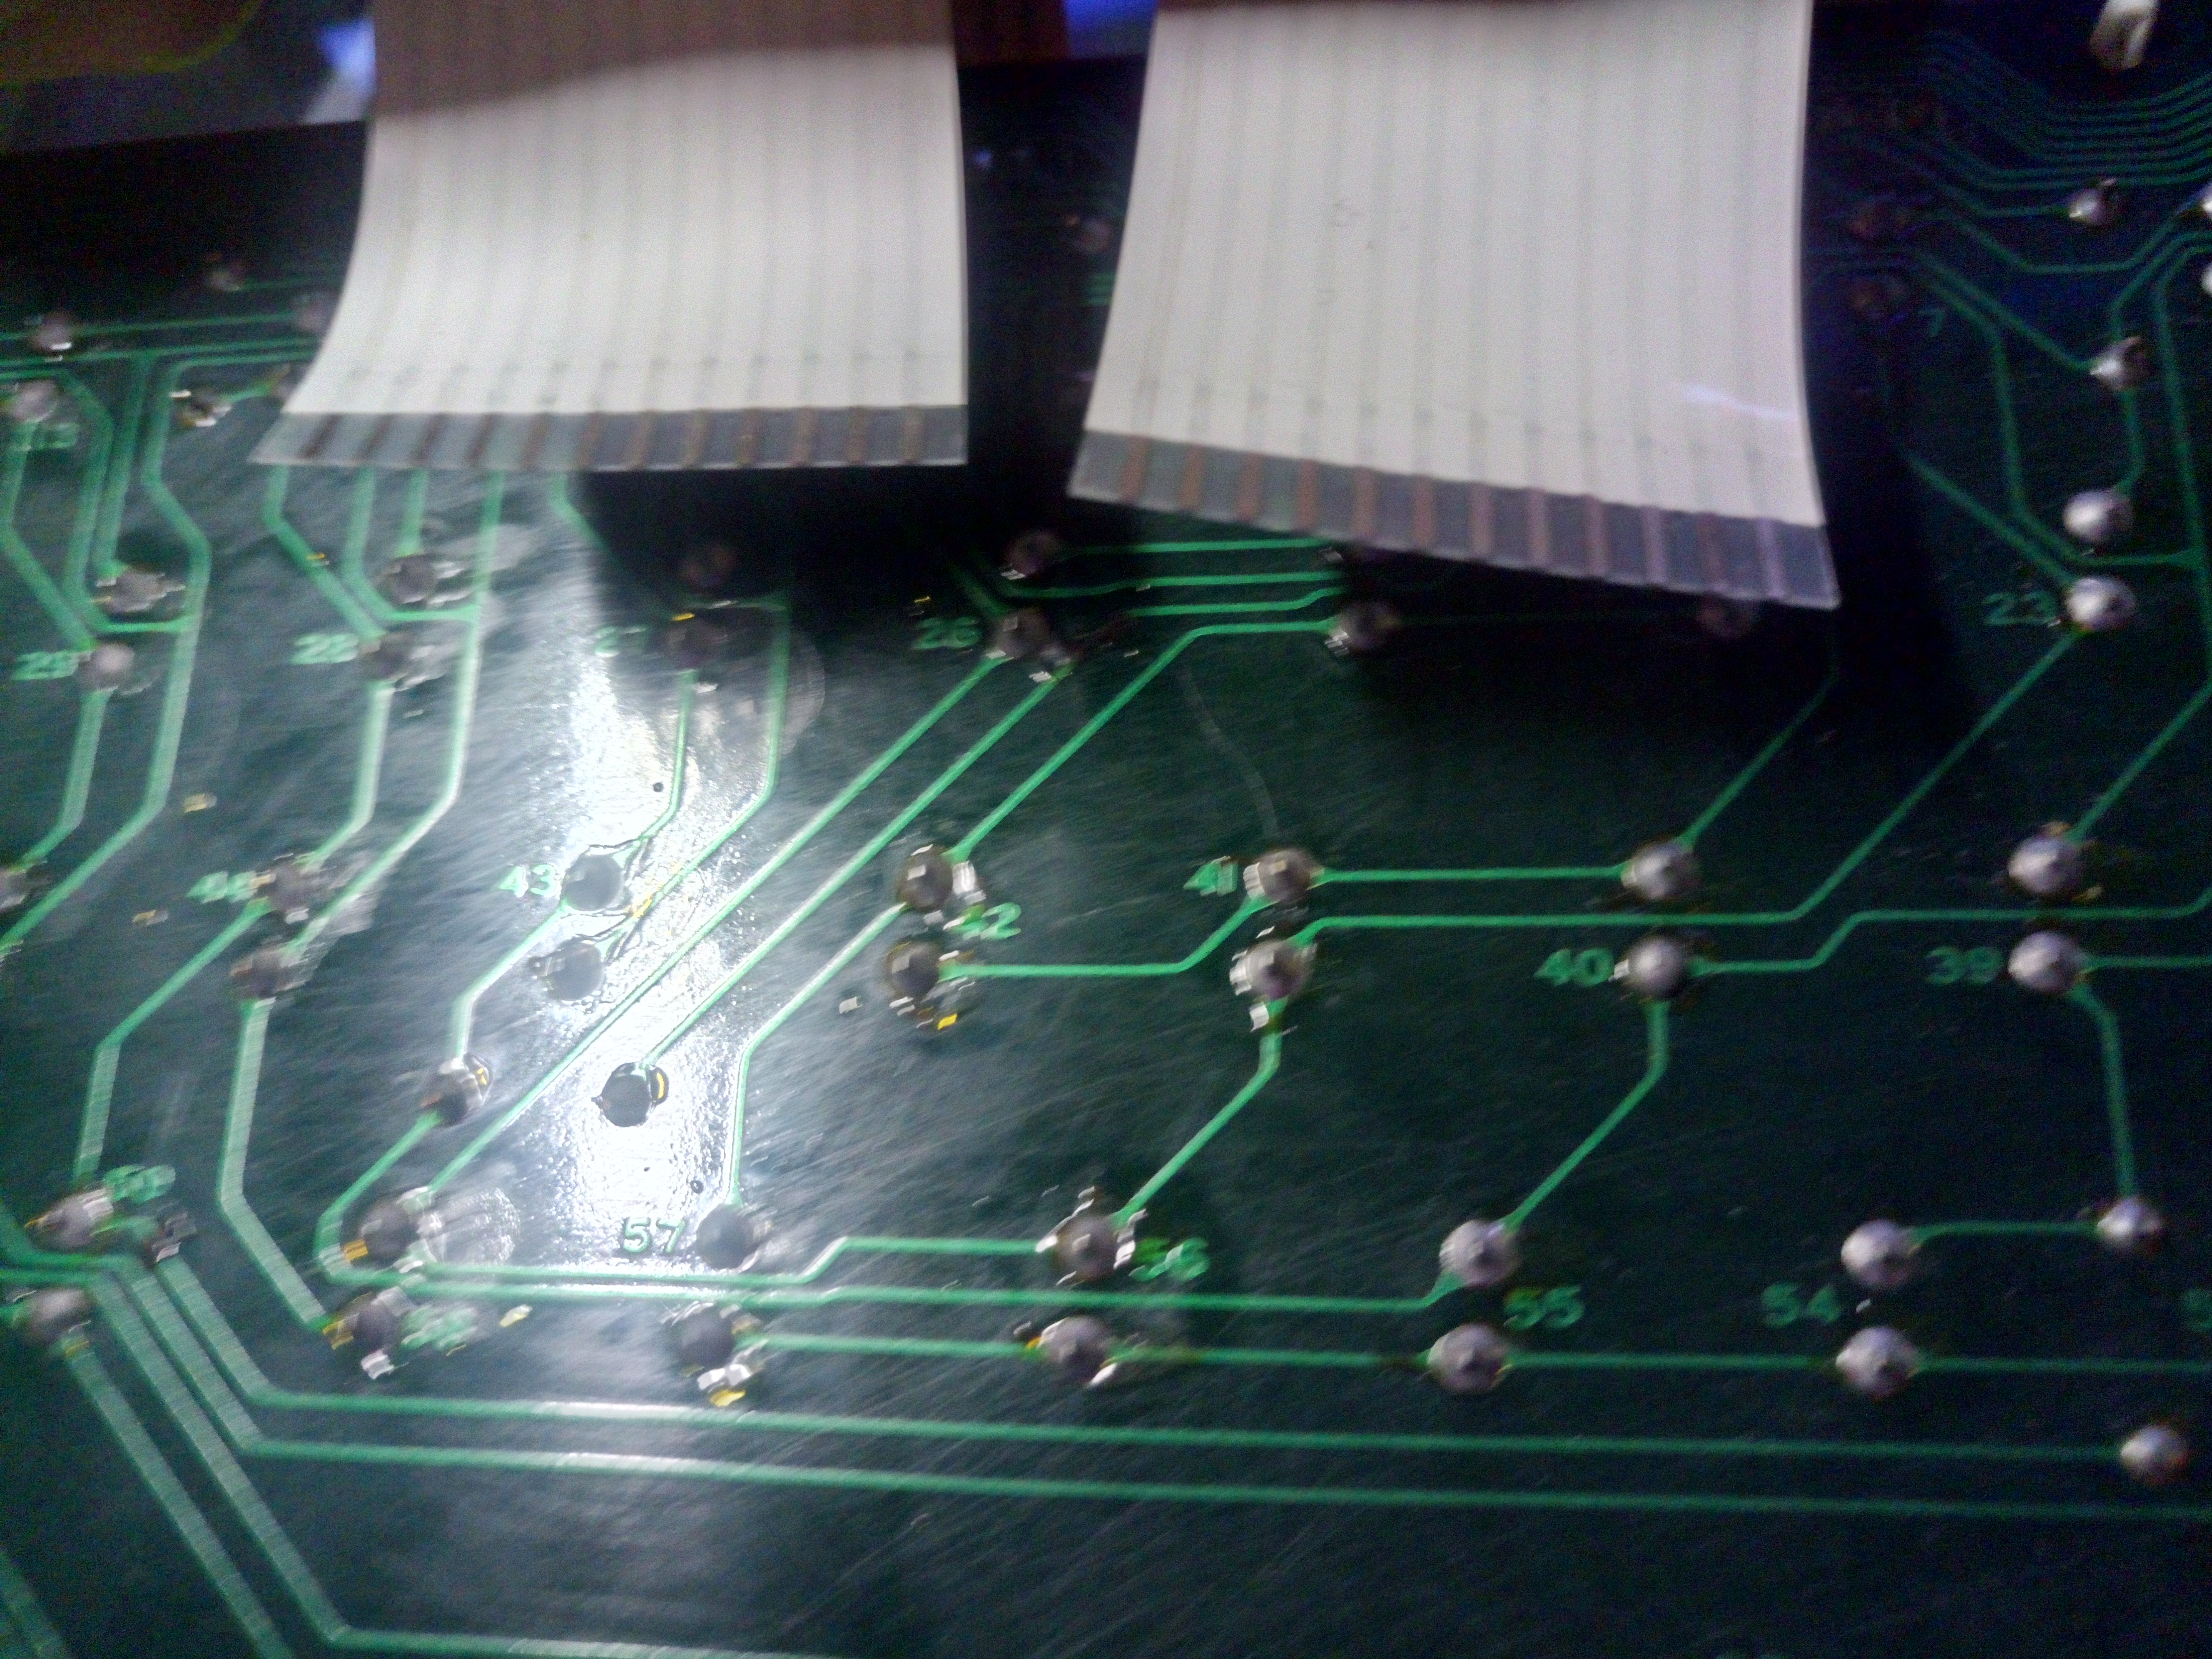 Ribbon cables soldered onto where the matrix/traces end. Not sure if I can use this, let me know!